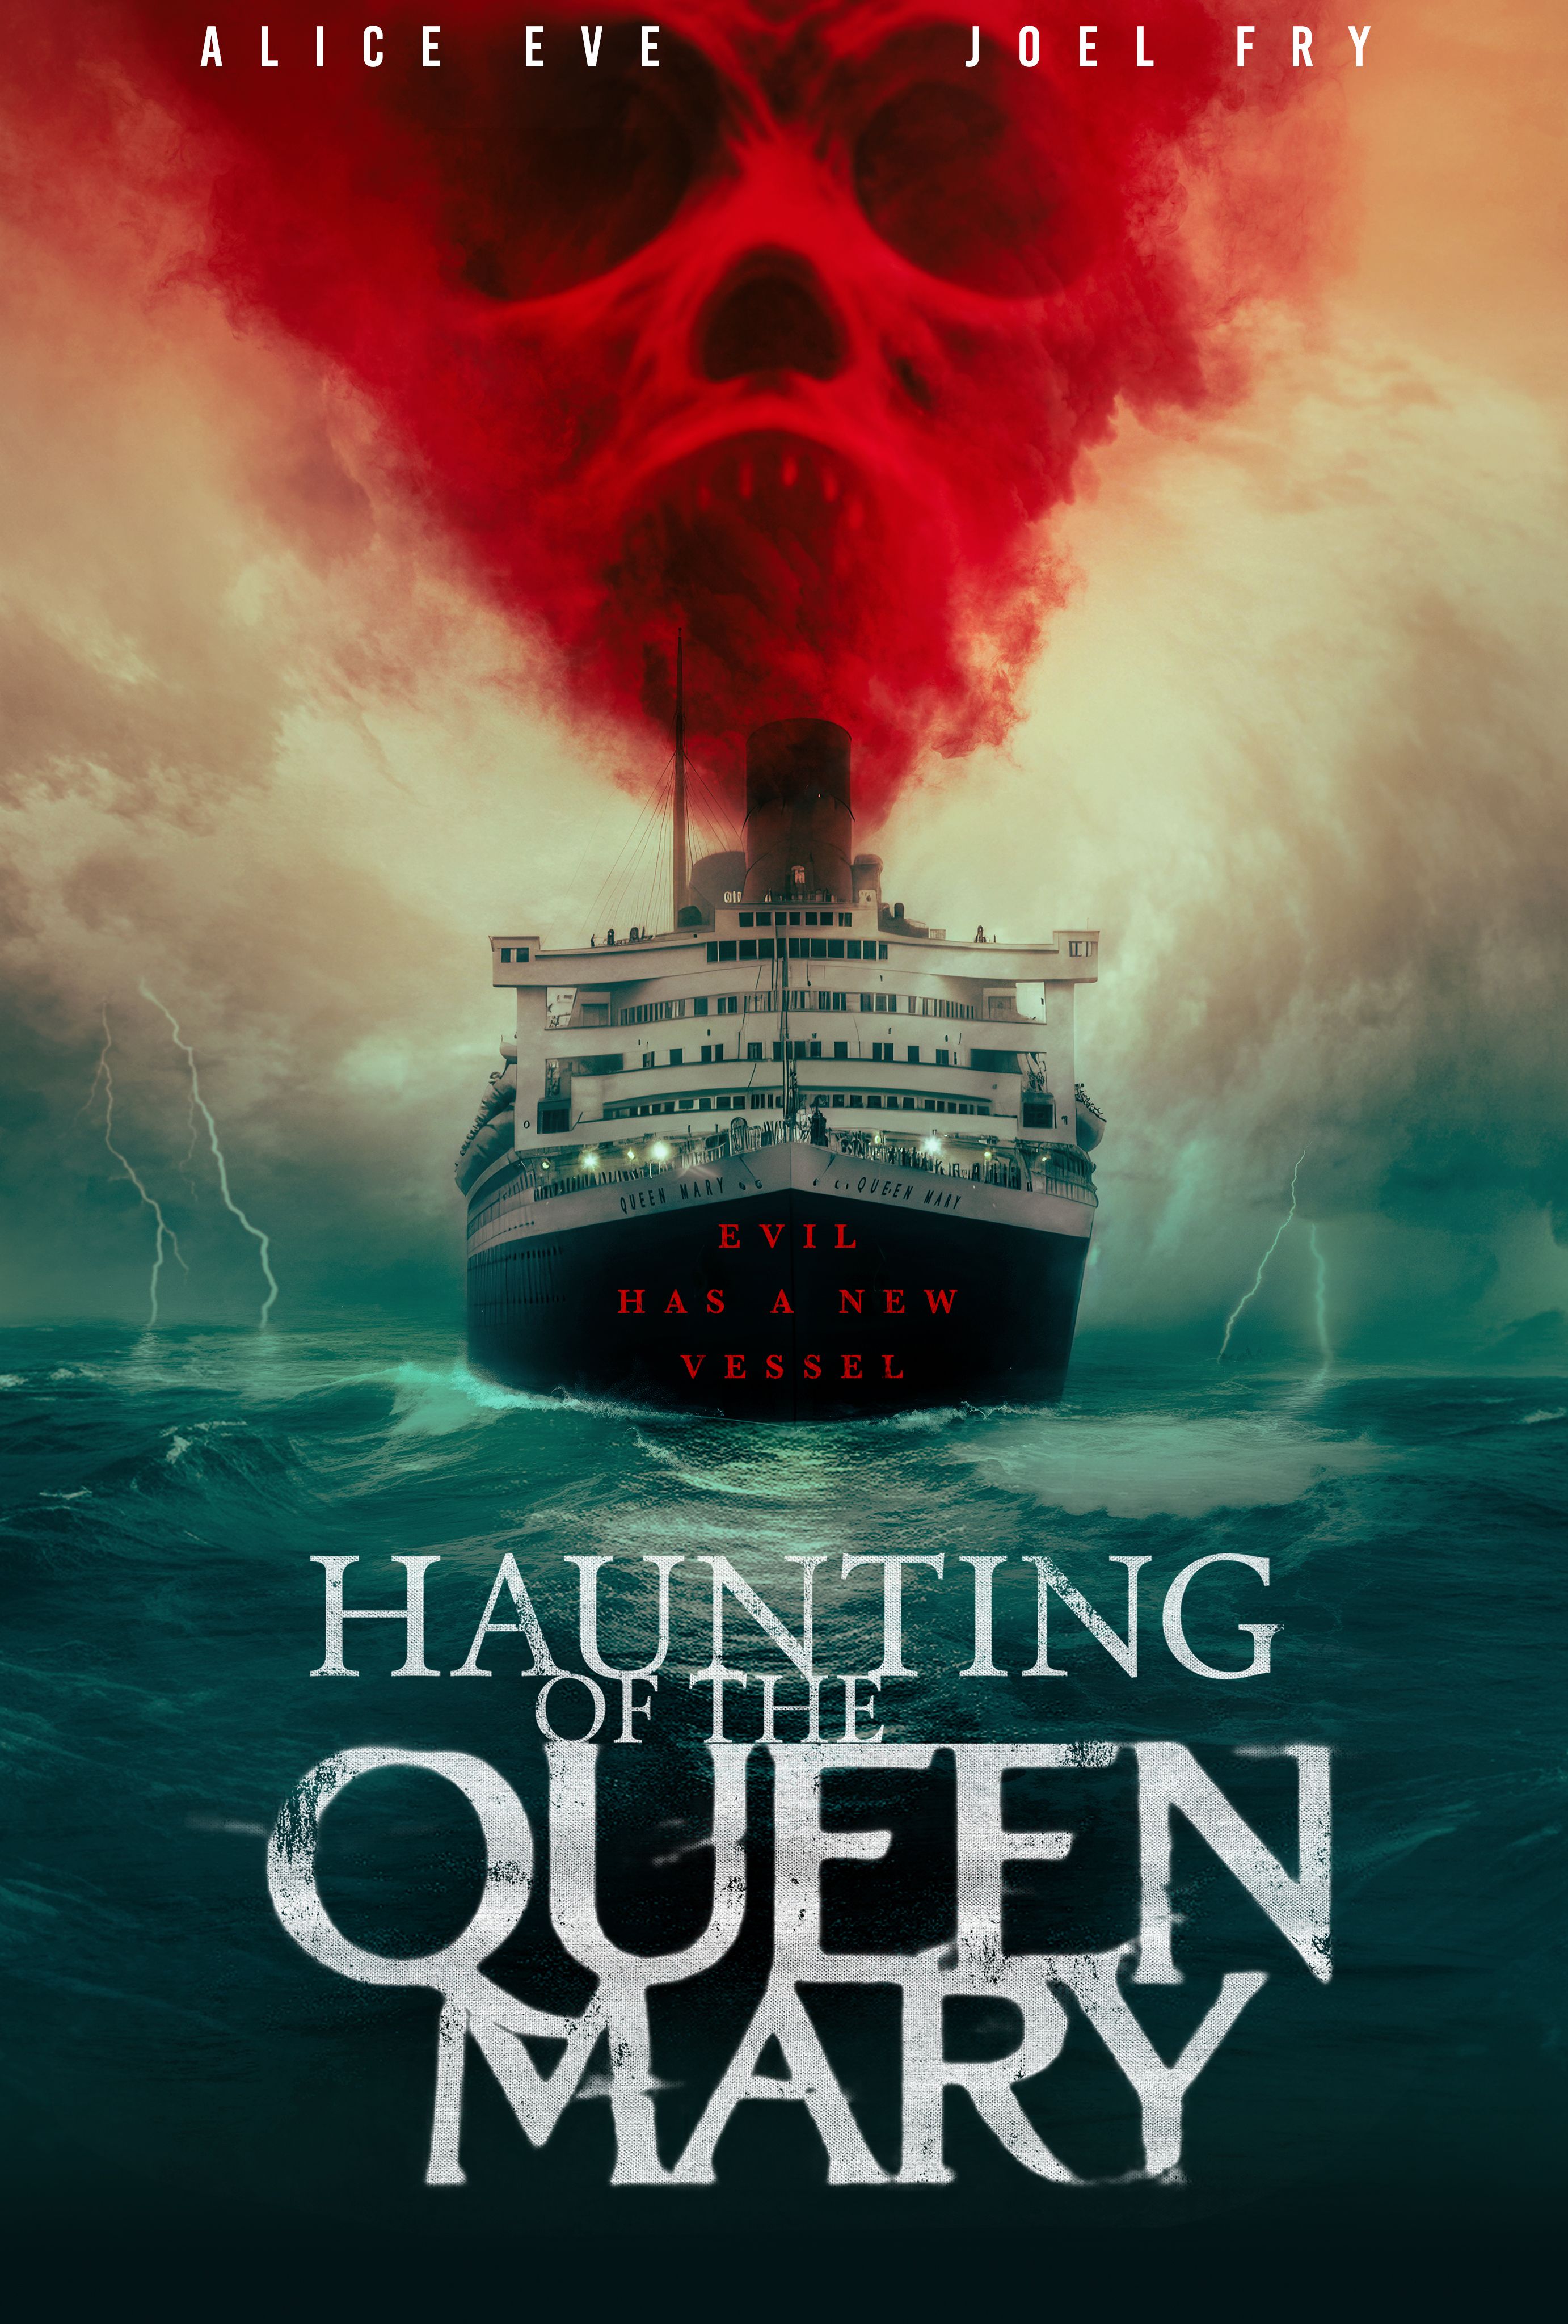 haunting of the queen mary movie review